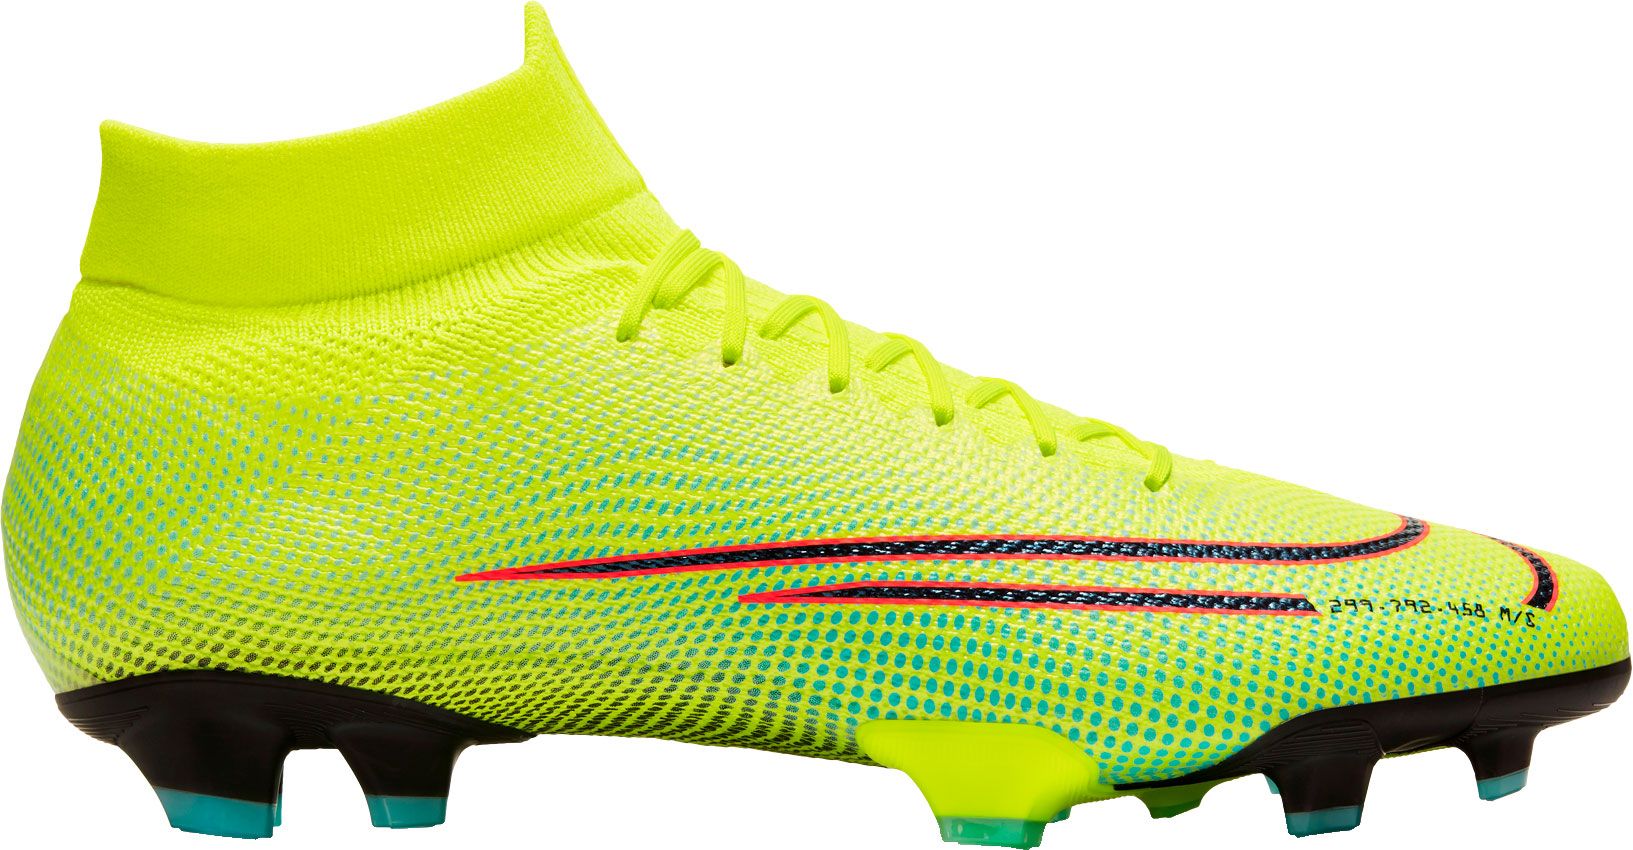 Nike Mercurial Superfly 7 Pro MDS FG Soccer Cleats | DICK'S Sporting Goods